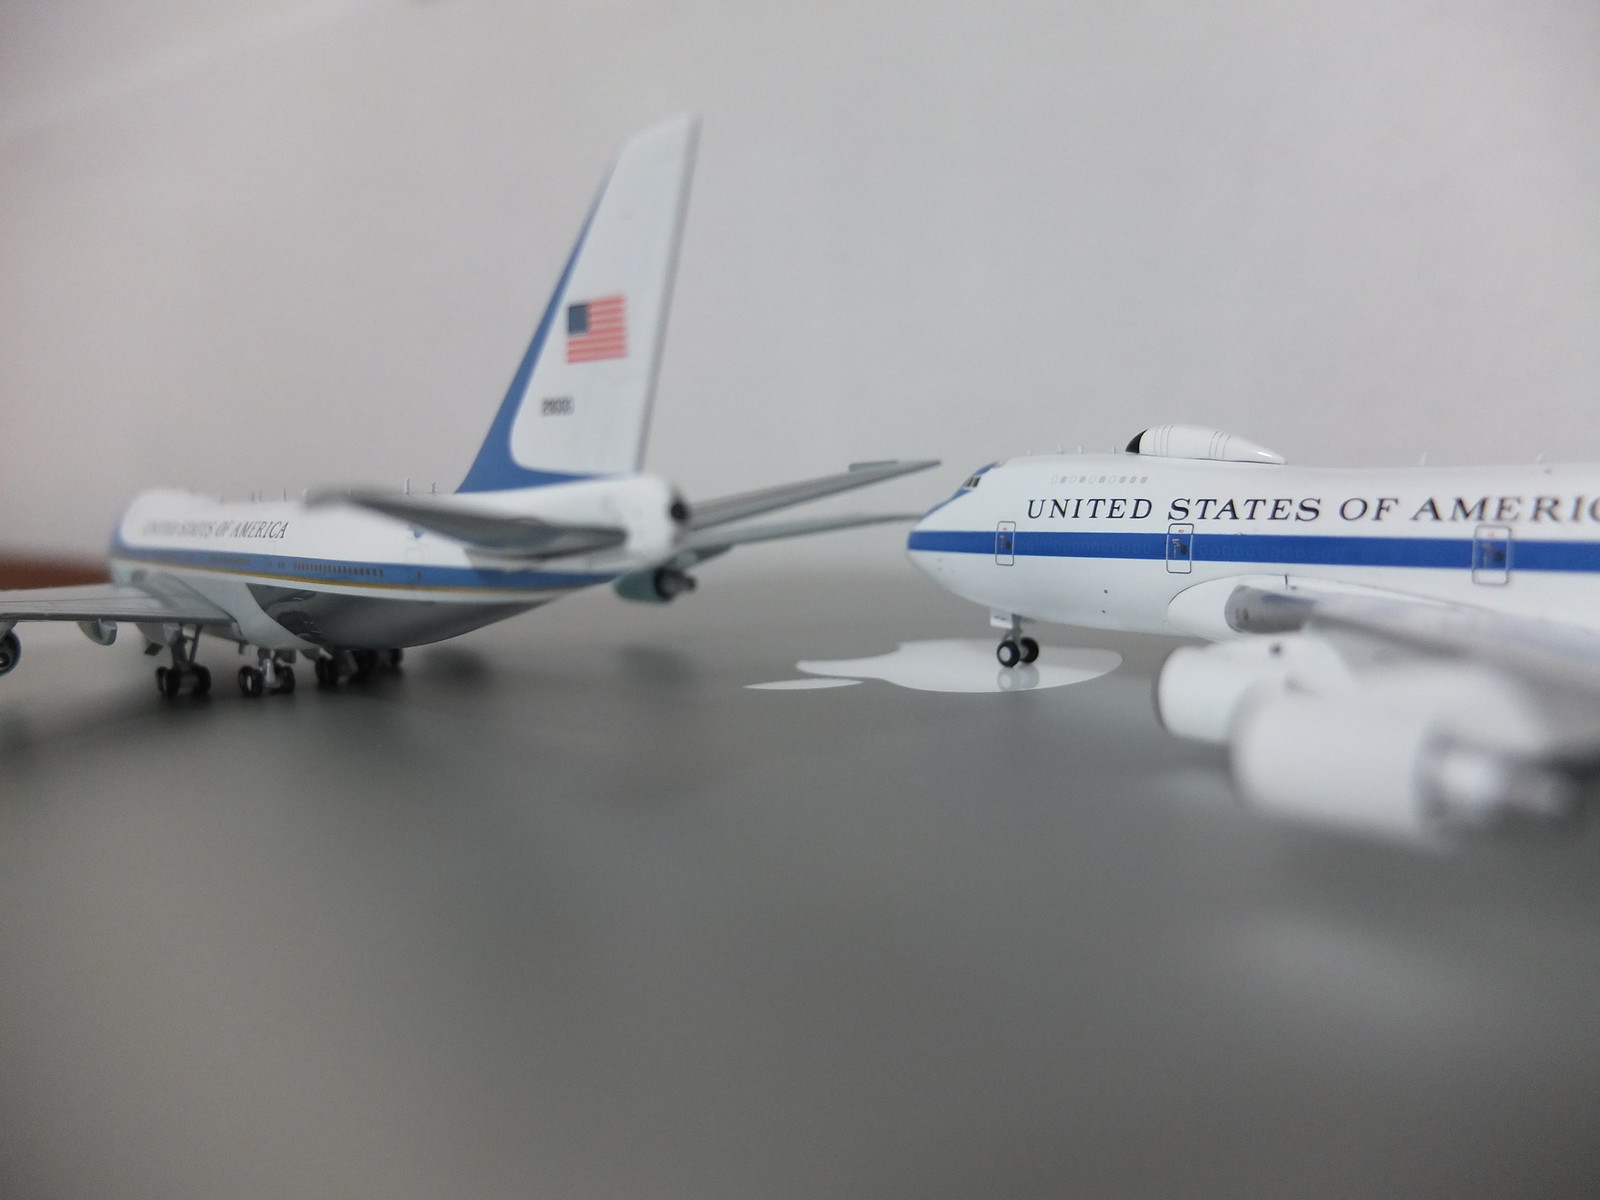 US AIR FORCE ONE🇺🇸 & US AIR FORCE DOOMSDAY🇺🇸